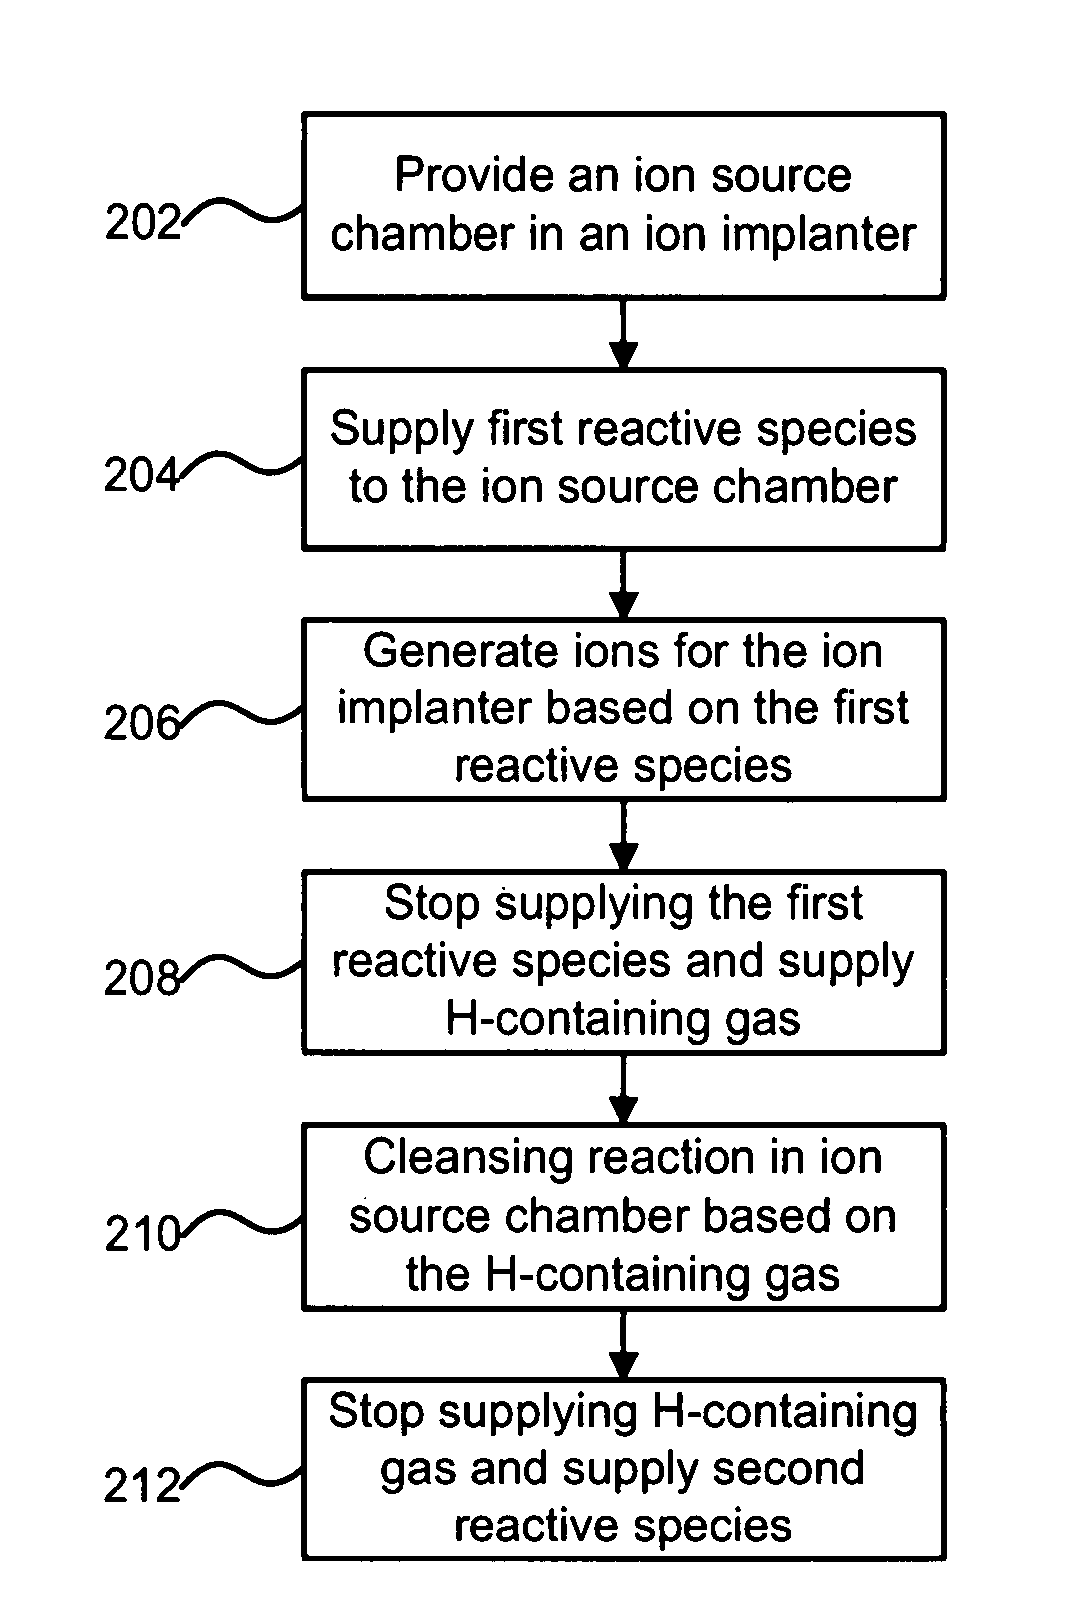 Technique for improving ion implanter productivity